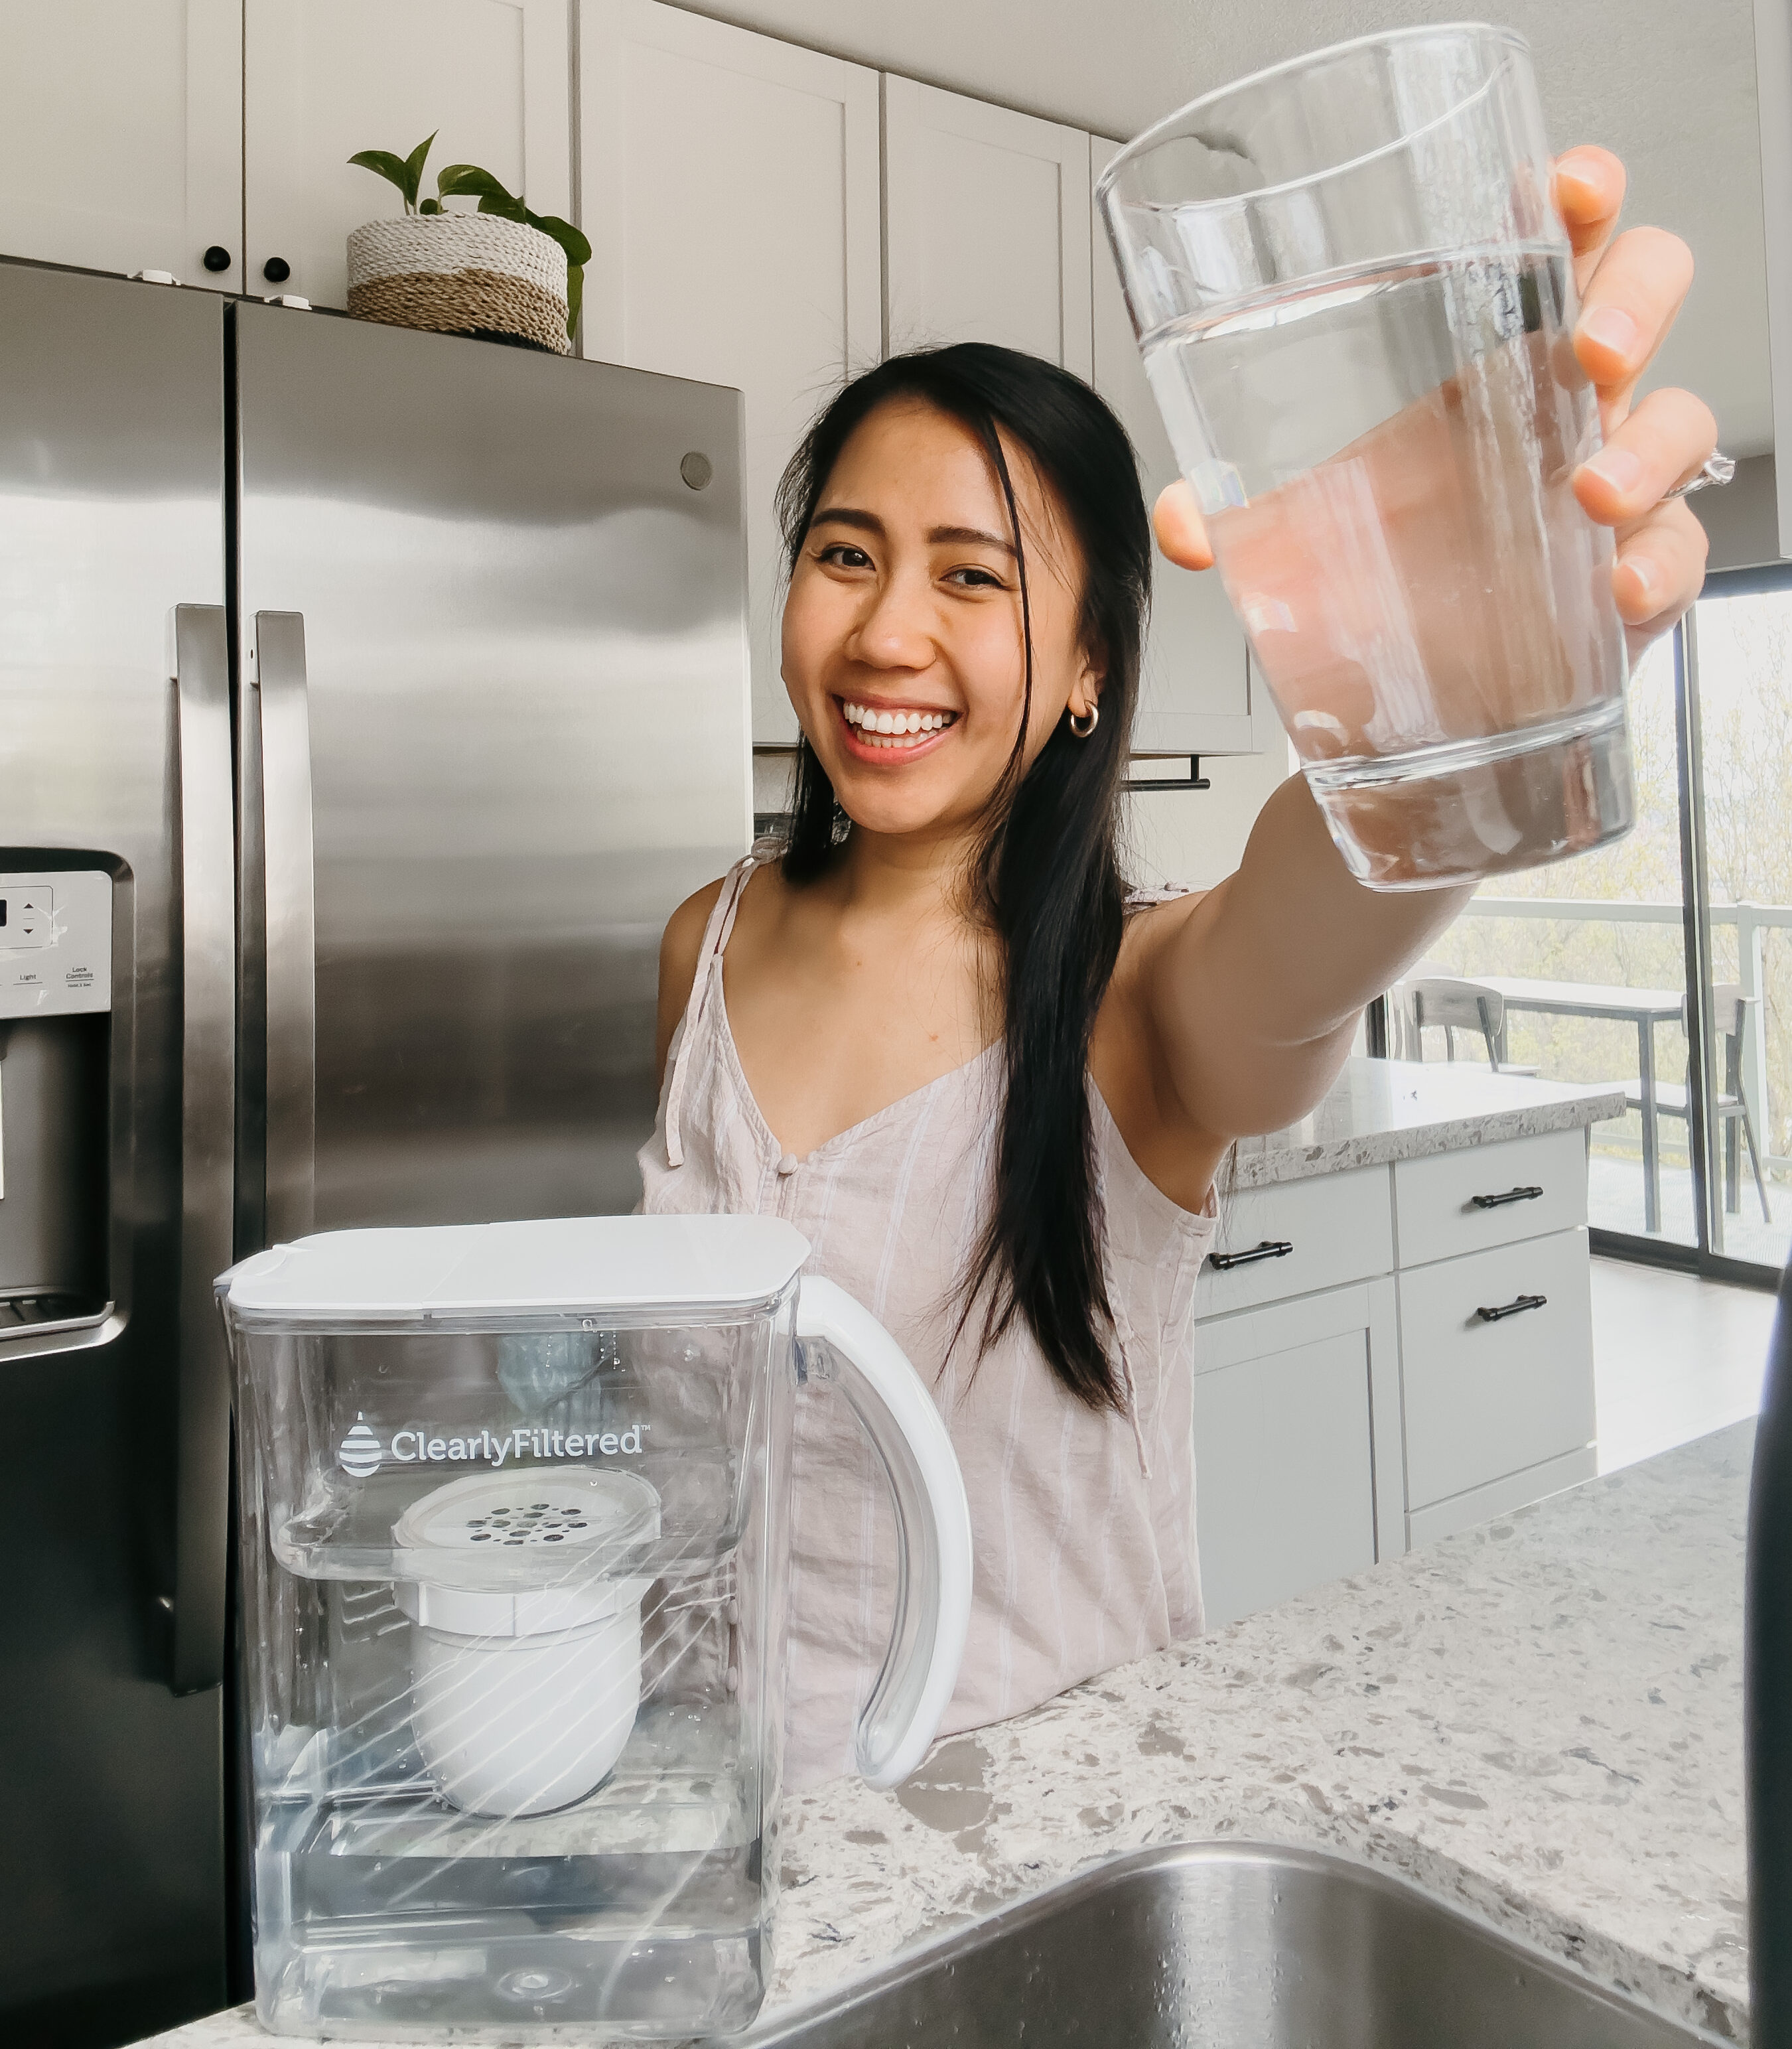 Is This Clearly Filtered Pitcher Worth the Cost? I Tried It So You Don’t Have To